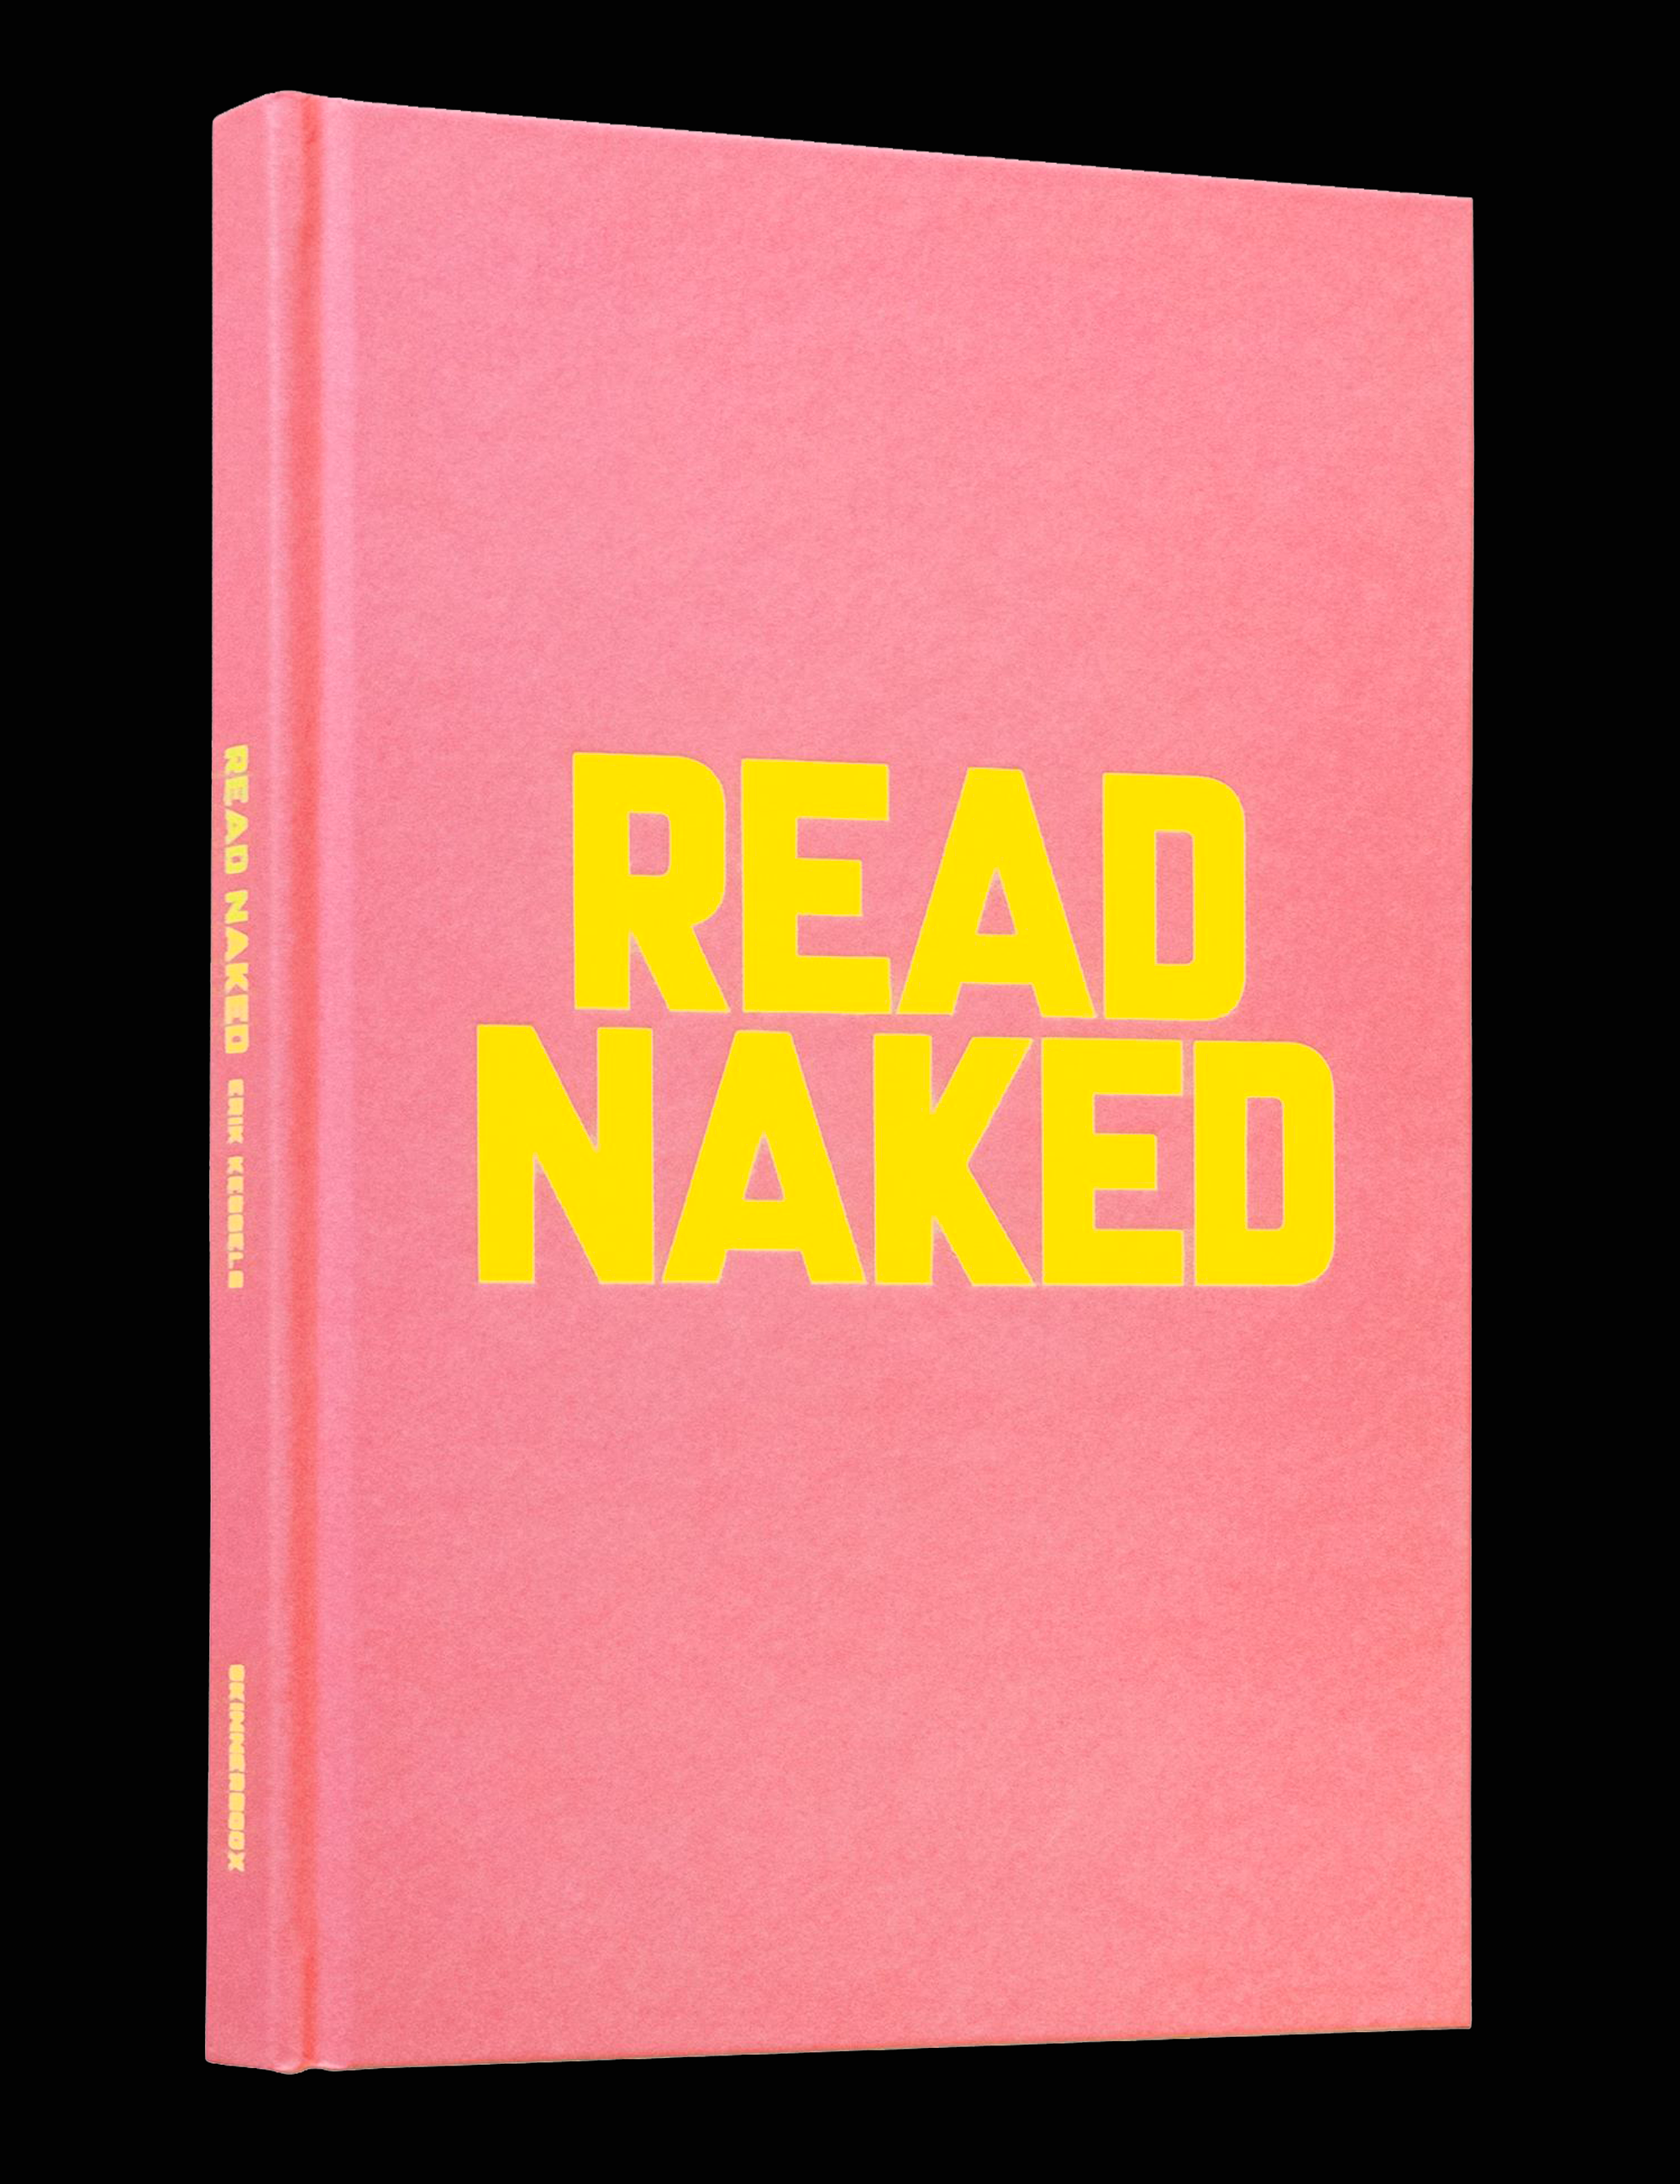 READ NAKED